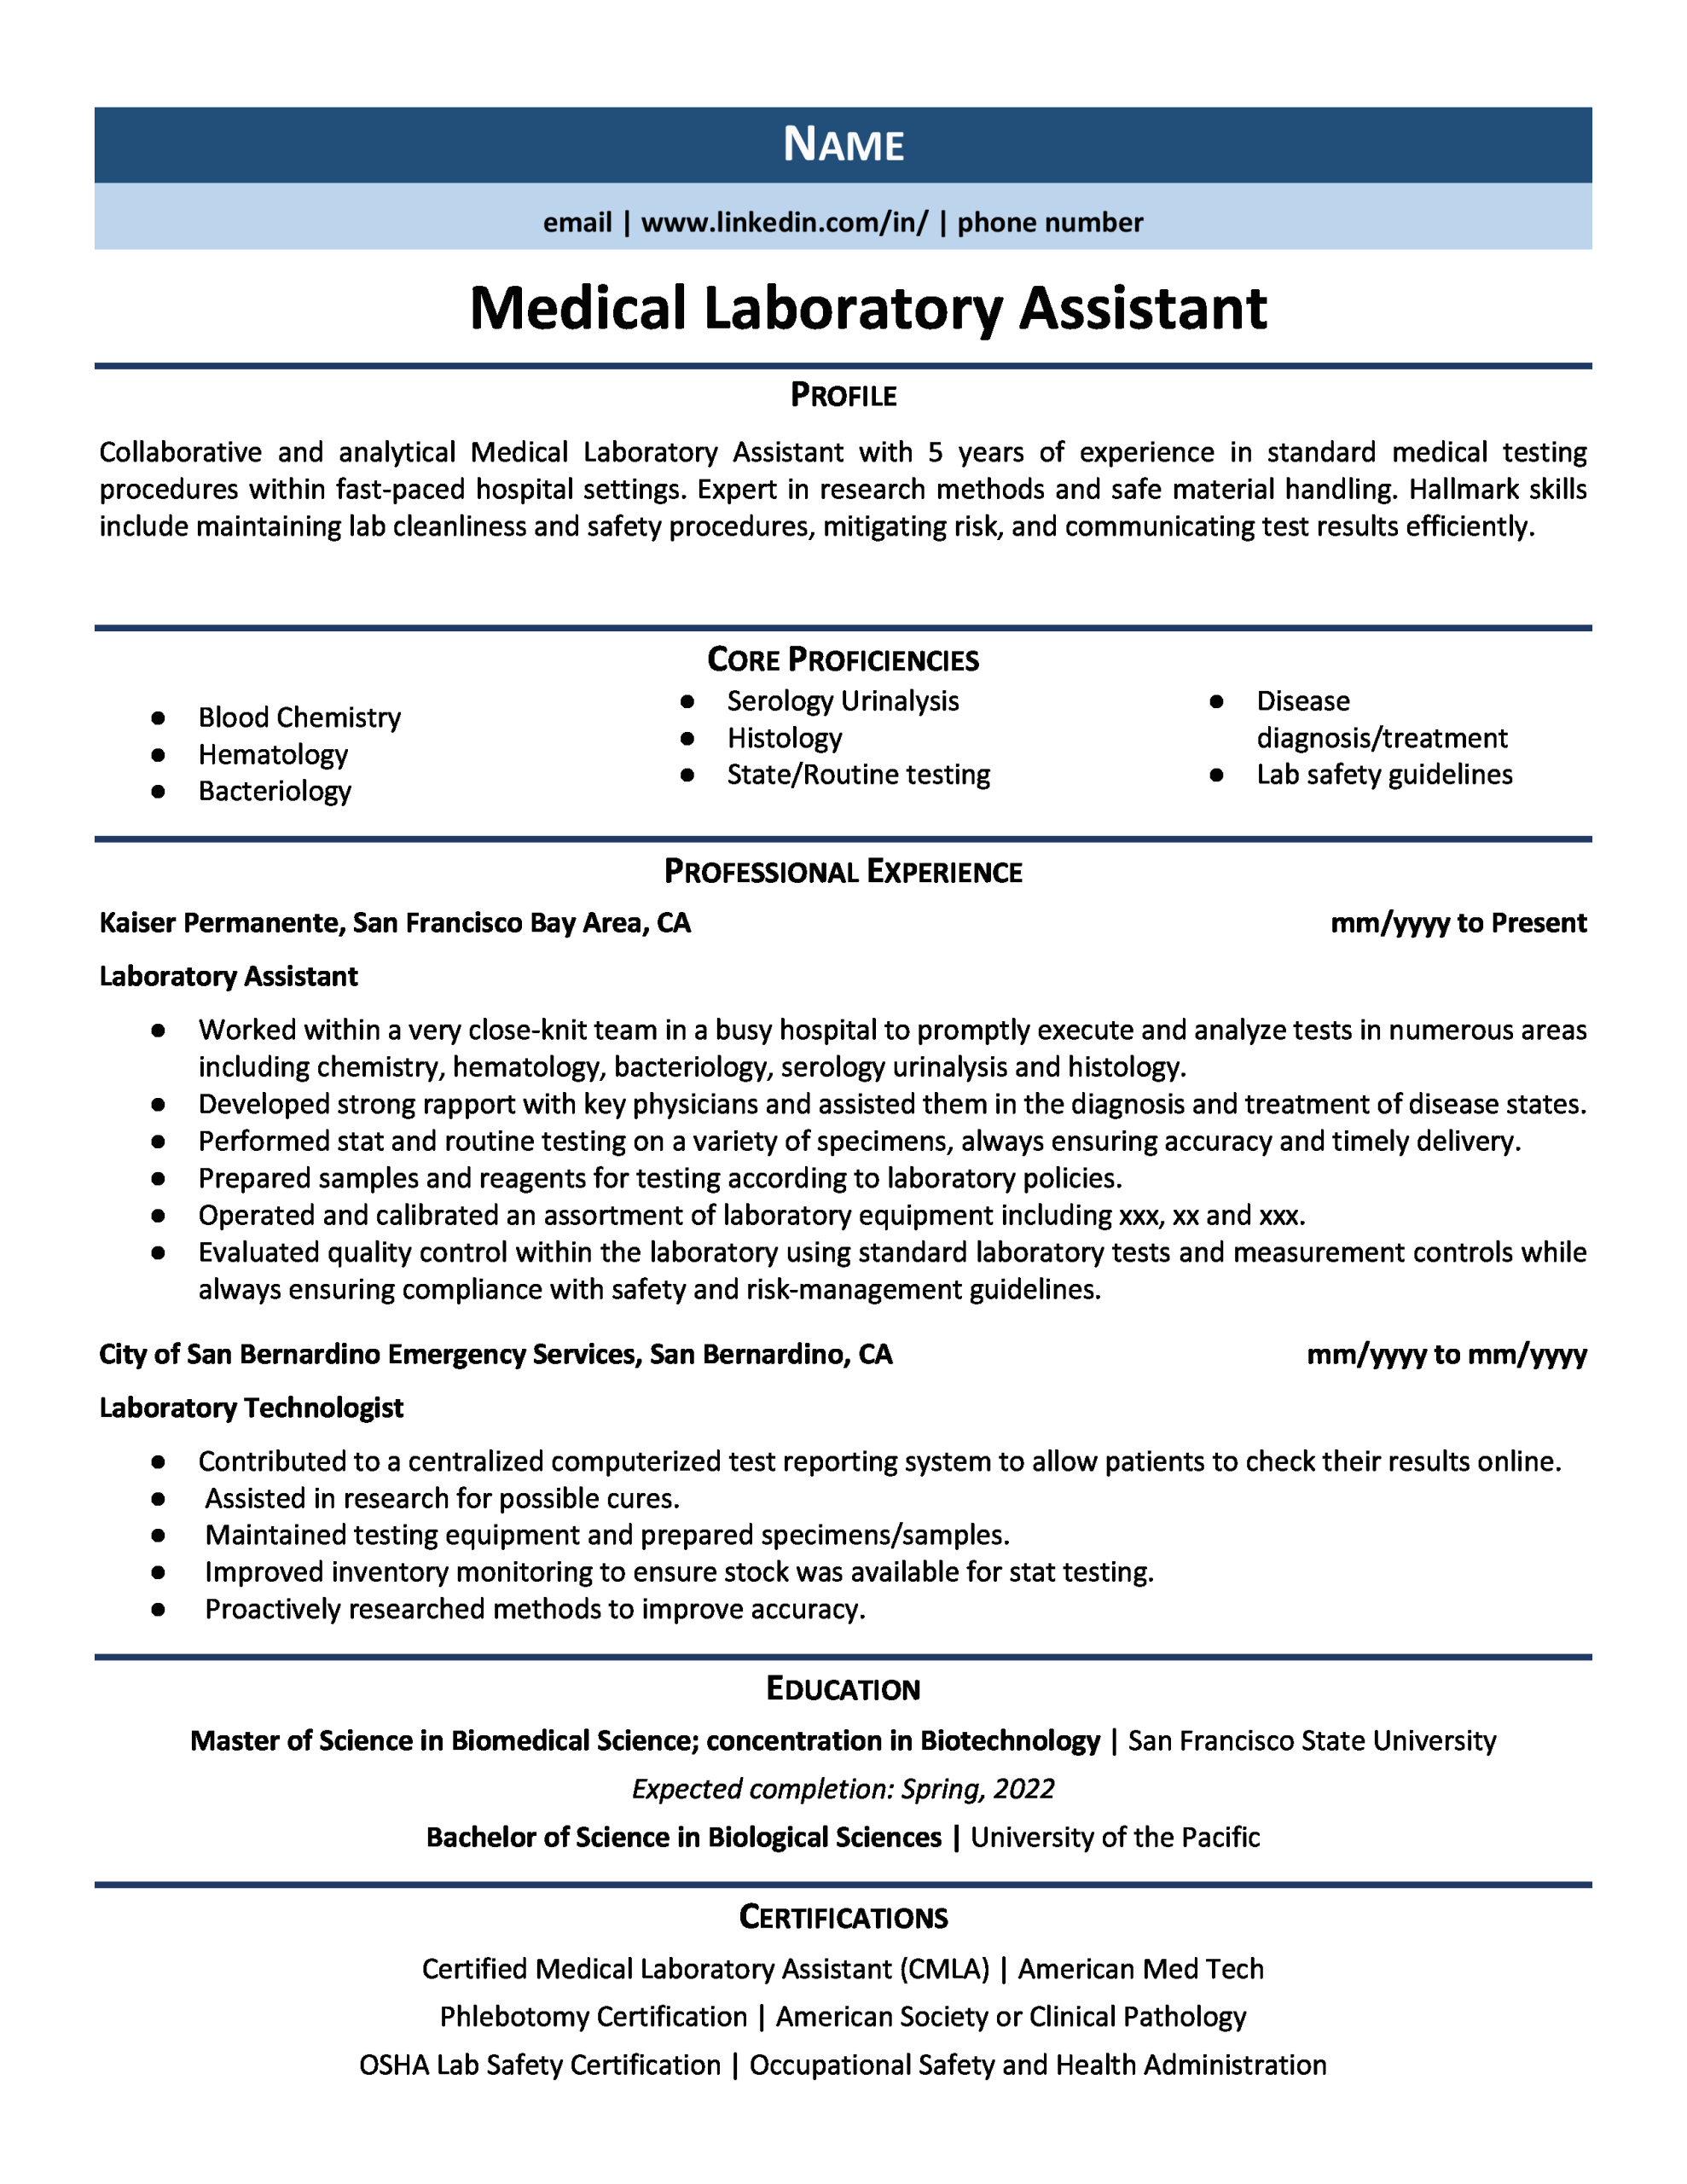 Sample Resume for Medical Laboratory Technician Student Medical Laboratory assistant Resume Your Plete Guide On How to